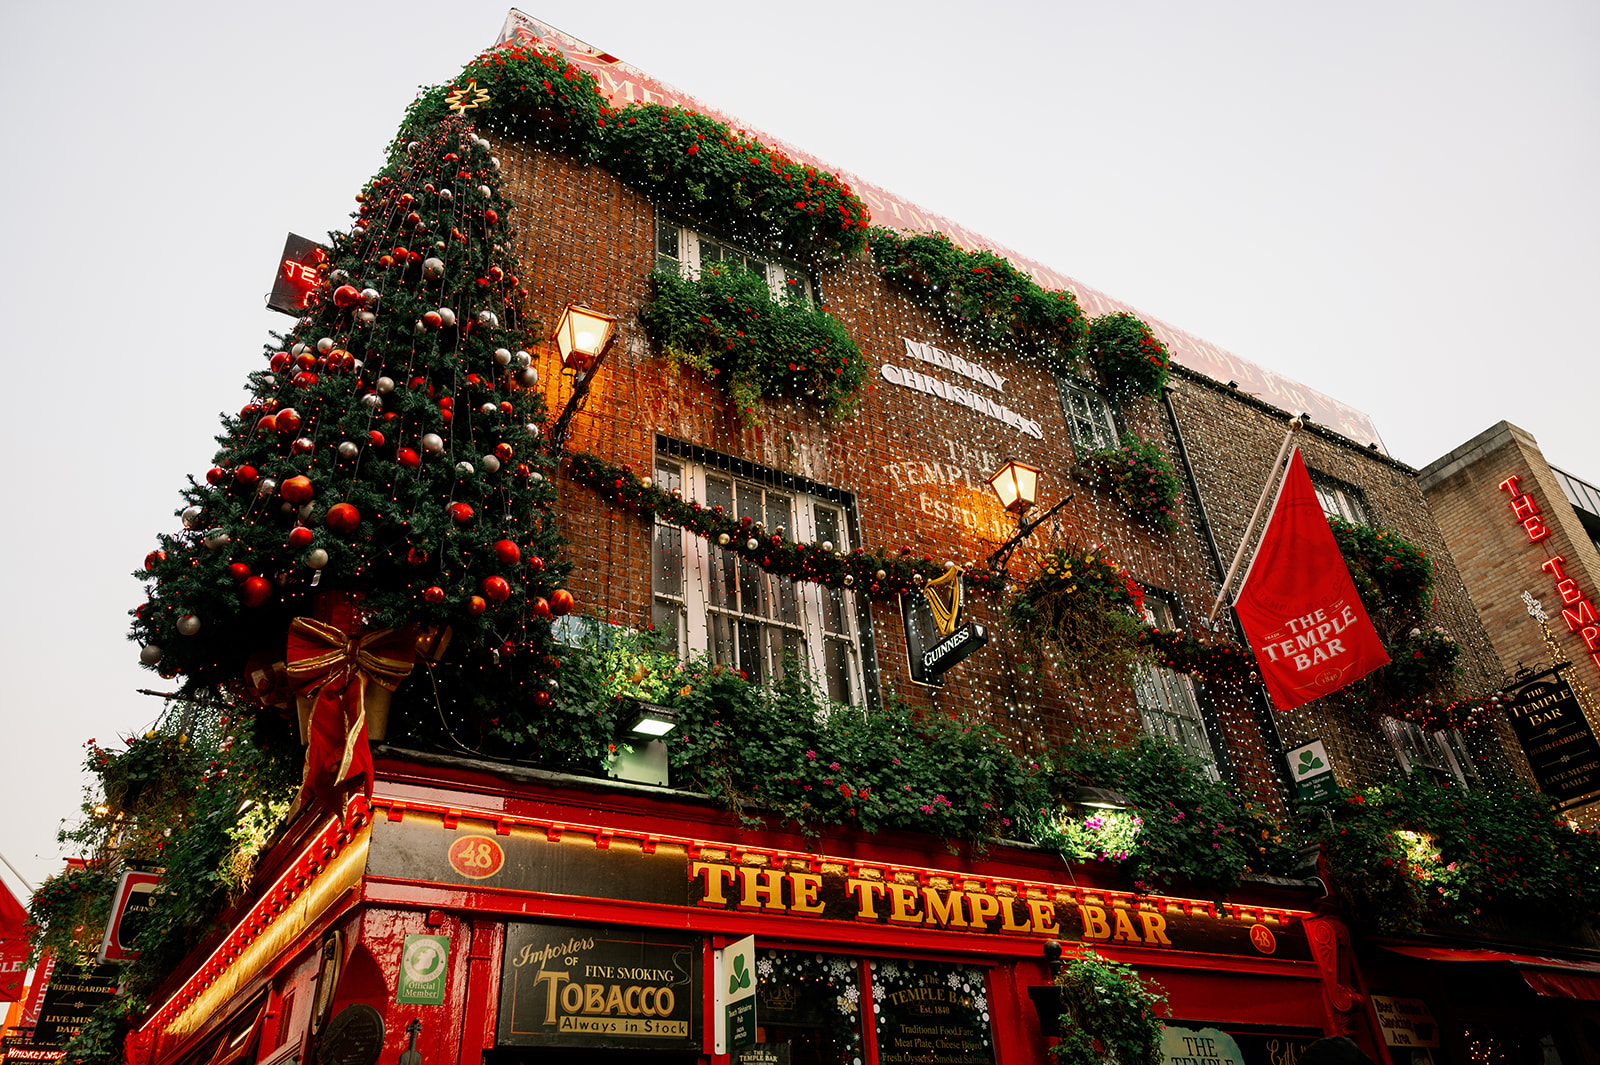 The Temple Bar pub in Dublin, Ireland decorated for Christmas.